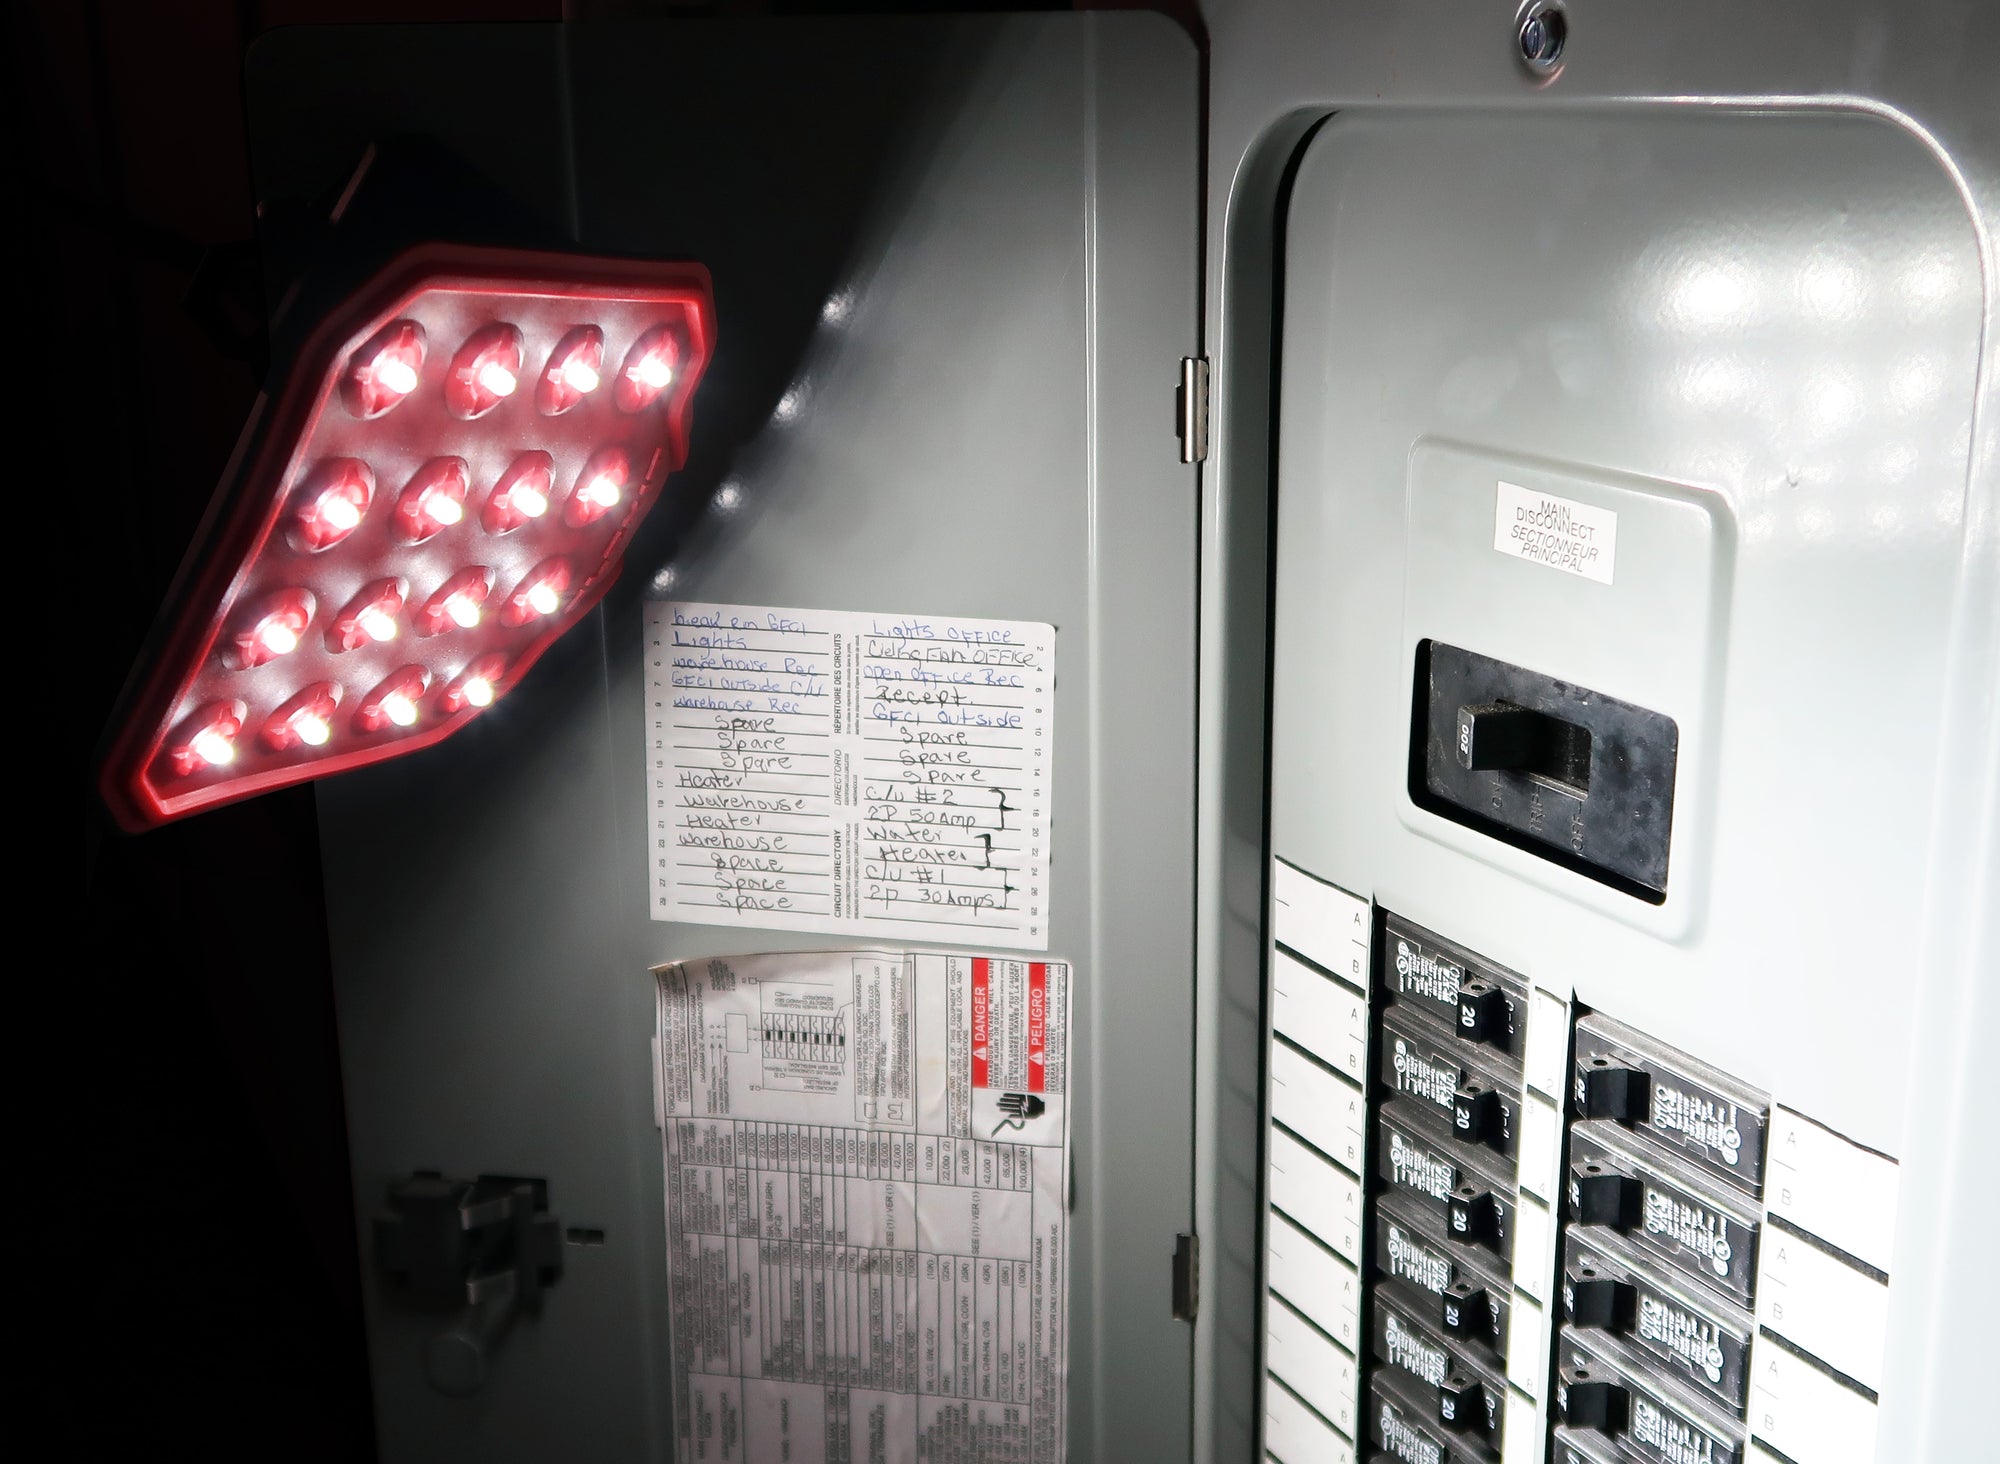 How Can I Light a Room Without Electricity? Best Emergency Lighting